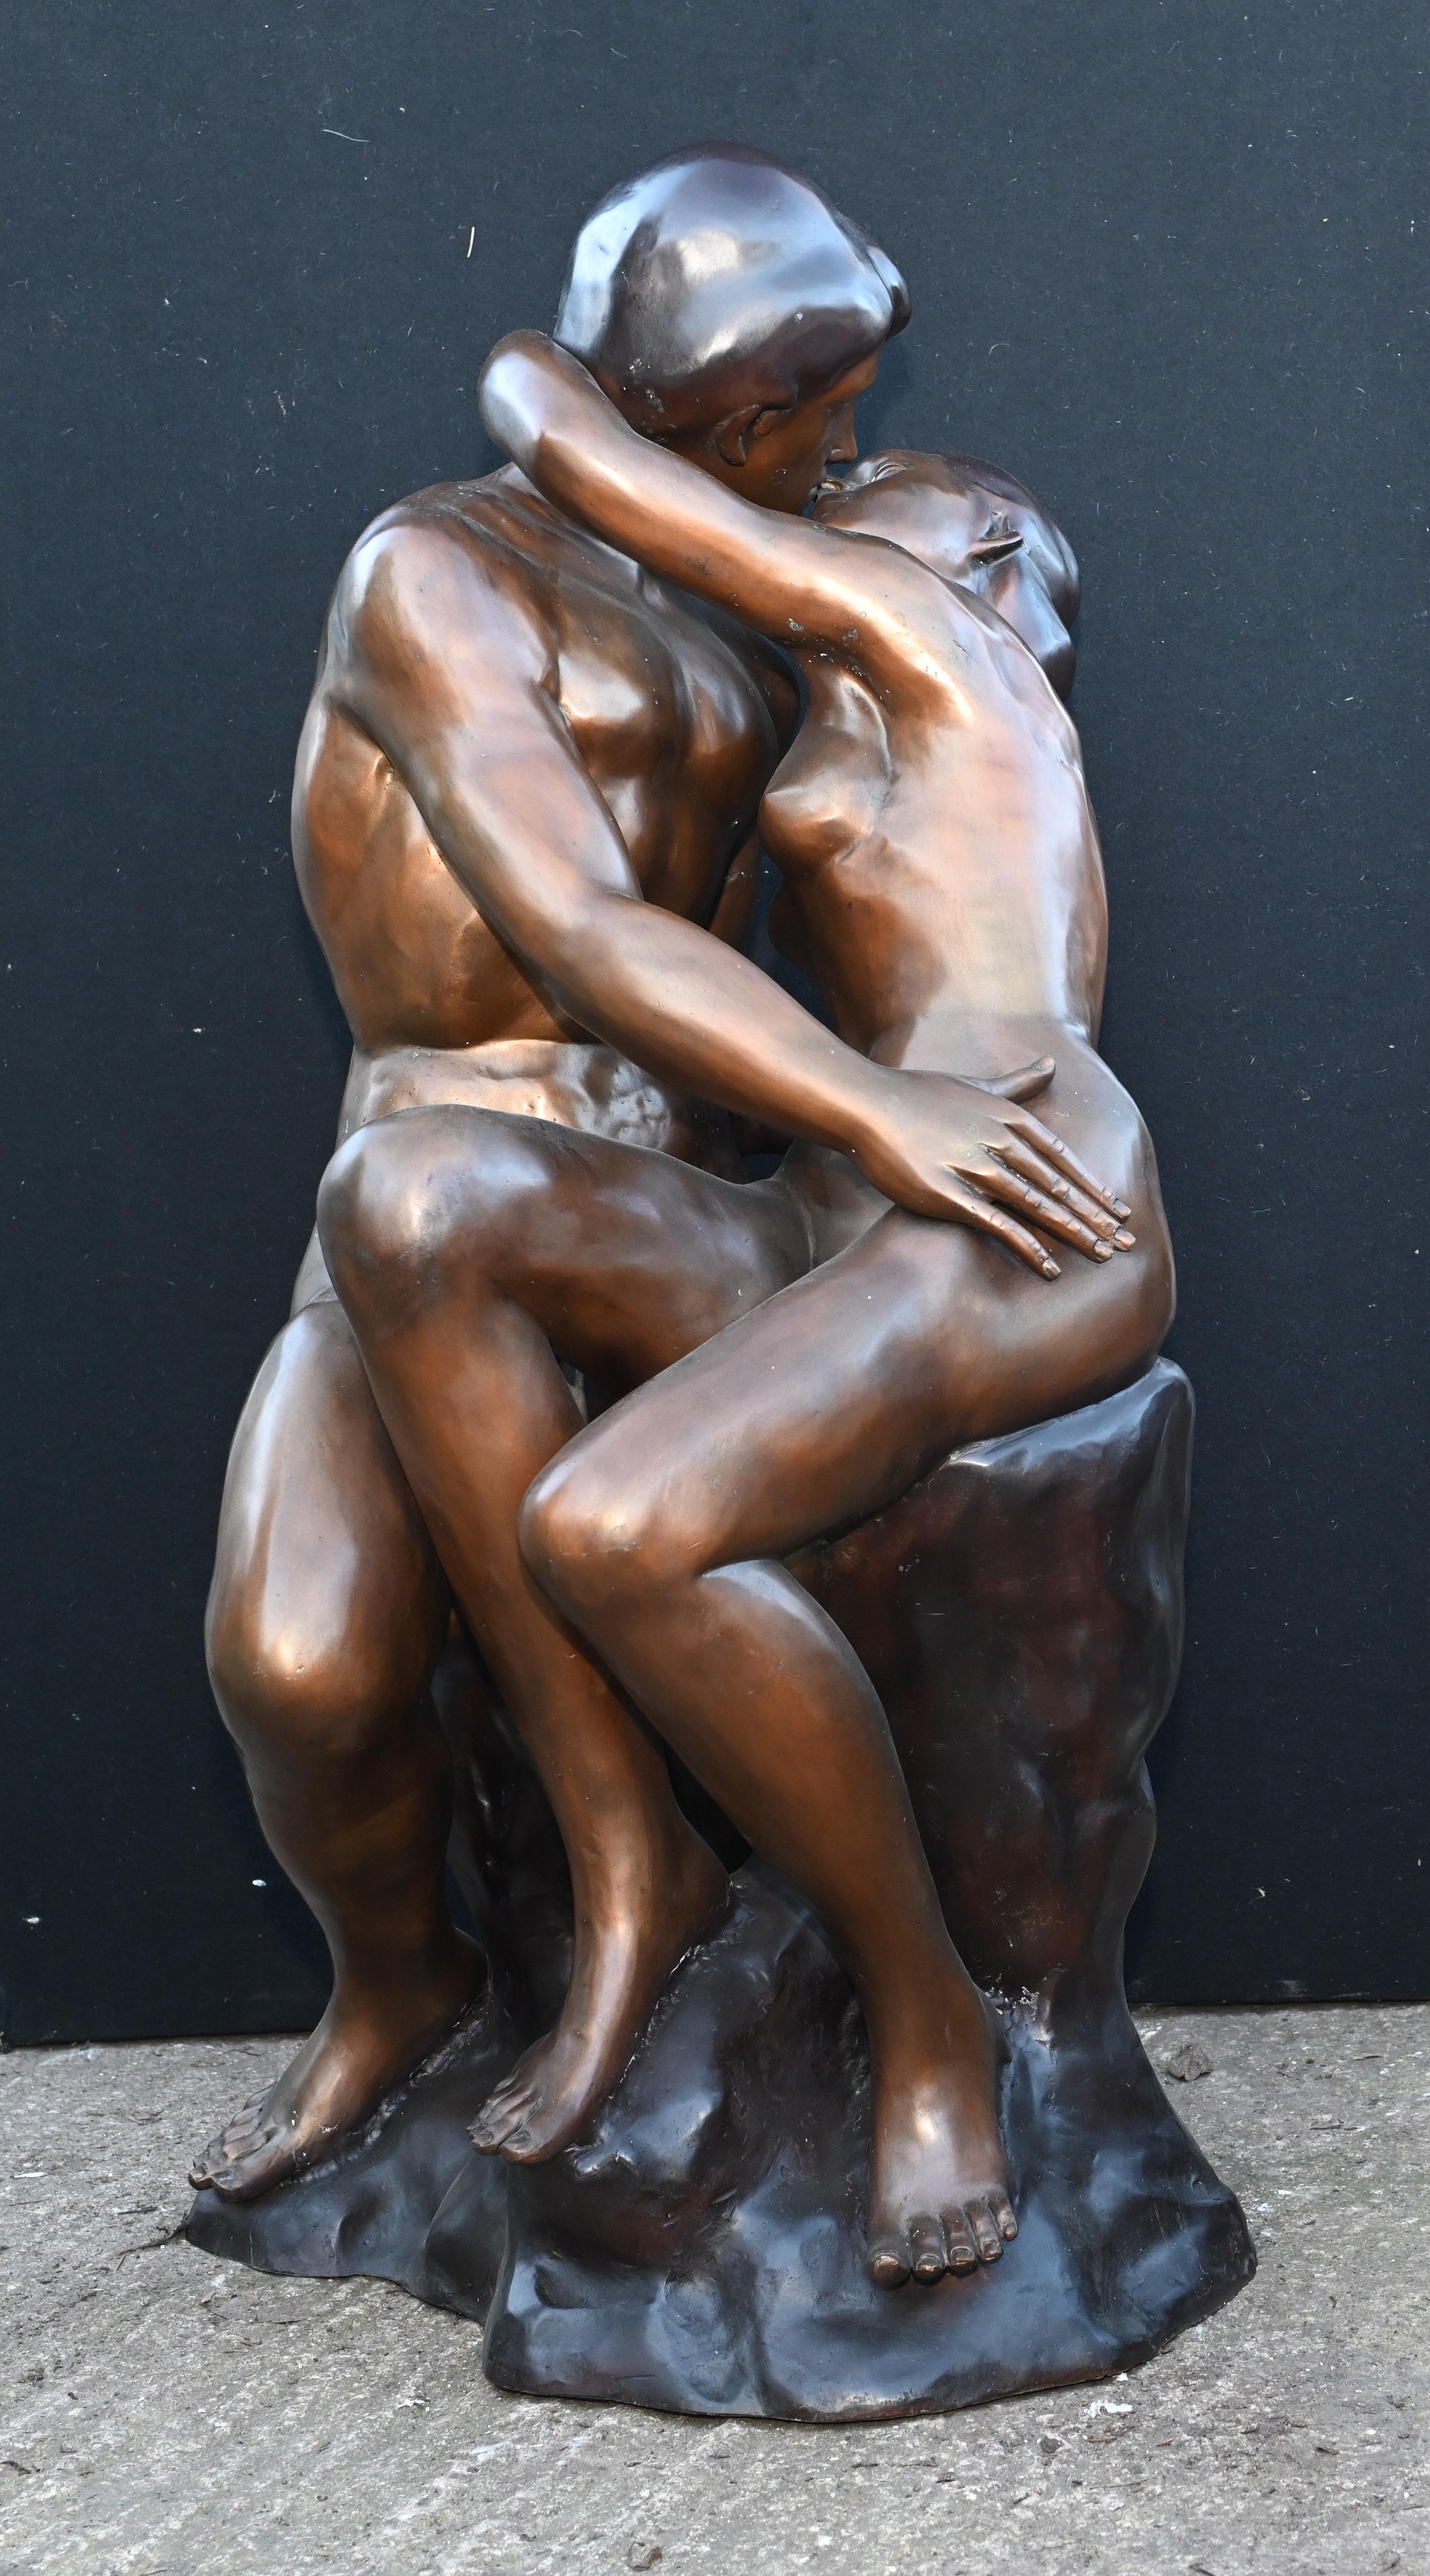 Large bronze casting of 'The Kiss' after the original by Auguste Rodin
Great work a classic piece of art perfect for the garden
Of course being bronze this can live outside with no fear of rusting
Would look great on the patio or lawn
We can